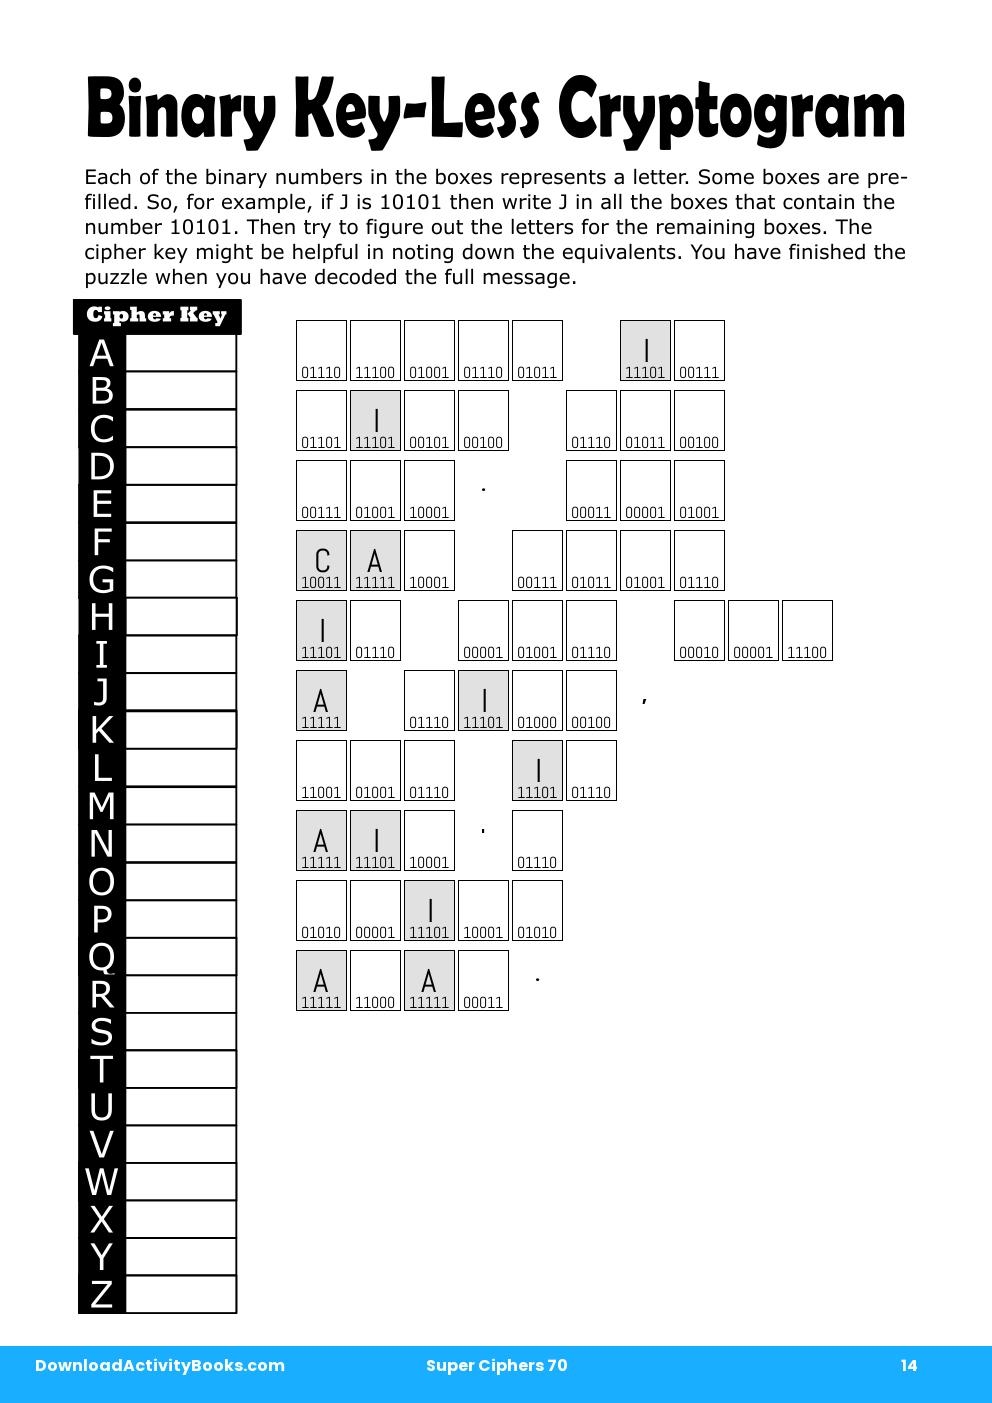 Binary Key-Less Cryptogram in Super Ciphers 70